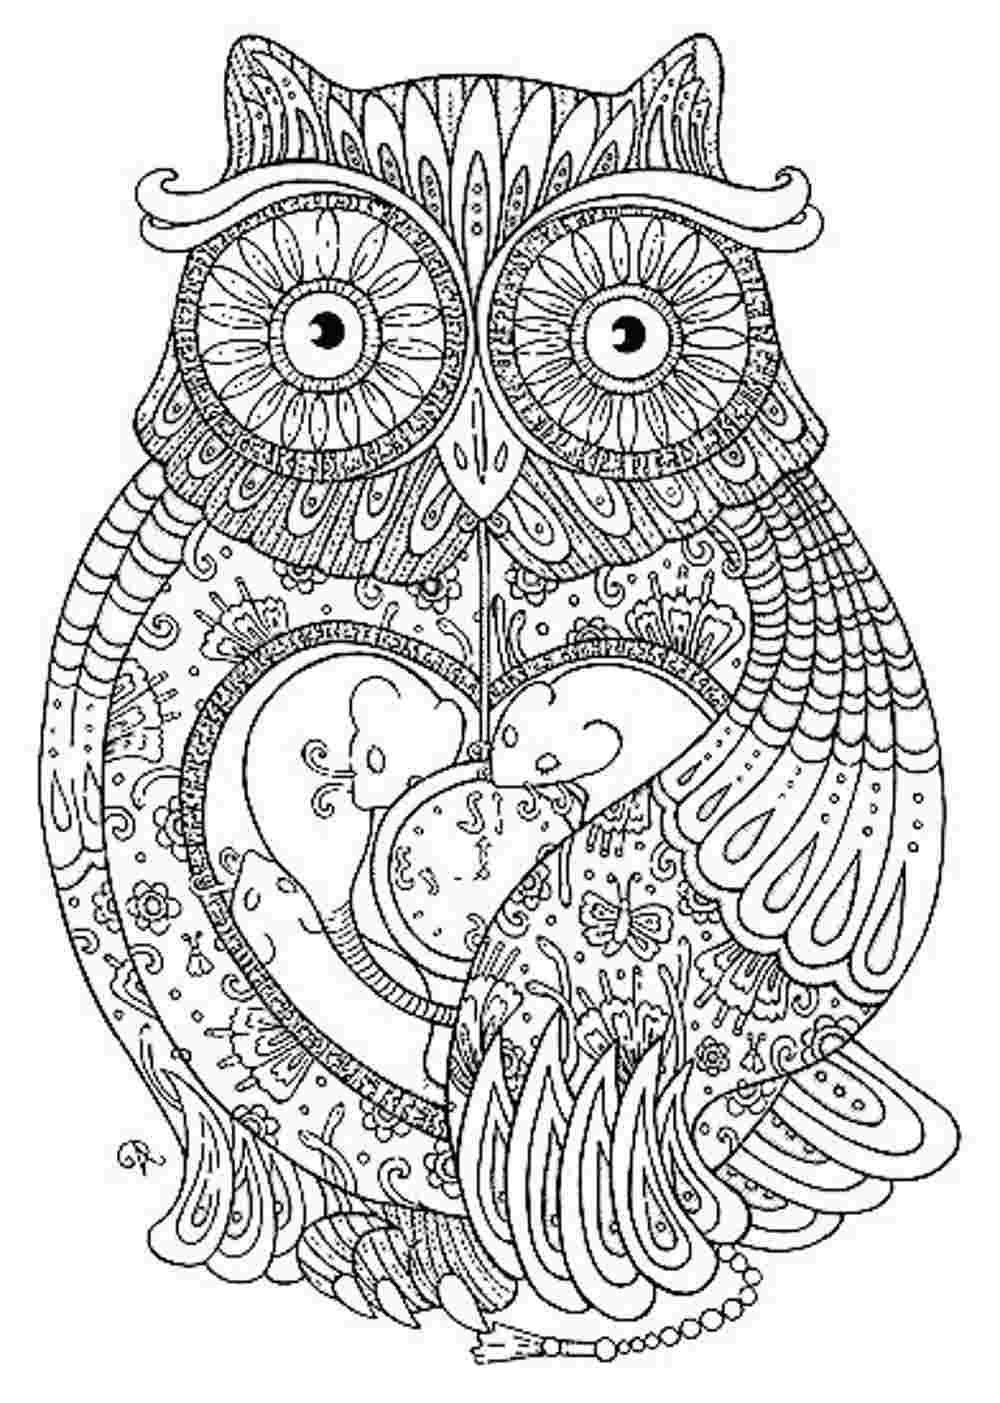 Coloring Book Pages Adult
 Free Printable Coloring Book Pages Best Adult Coloring